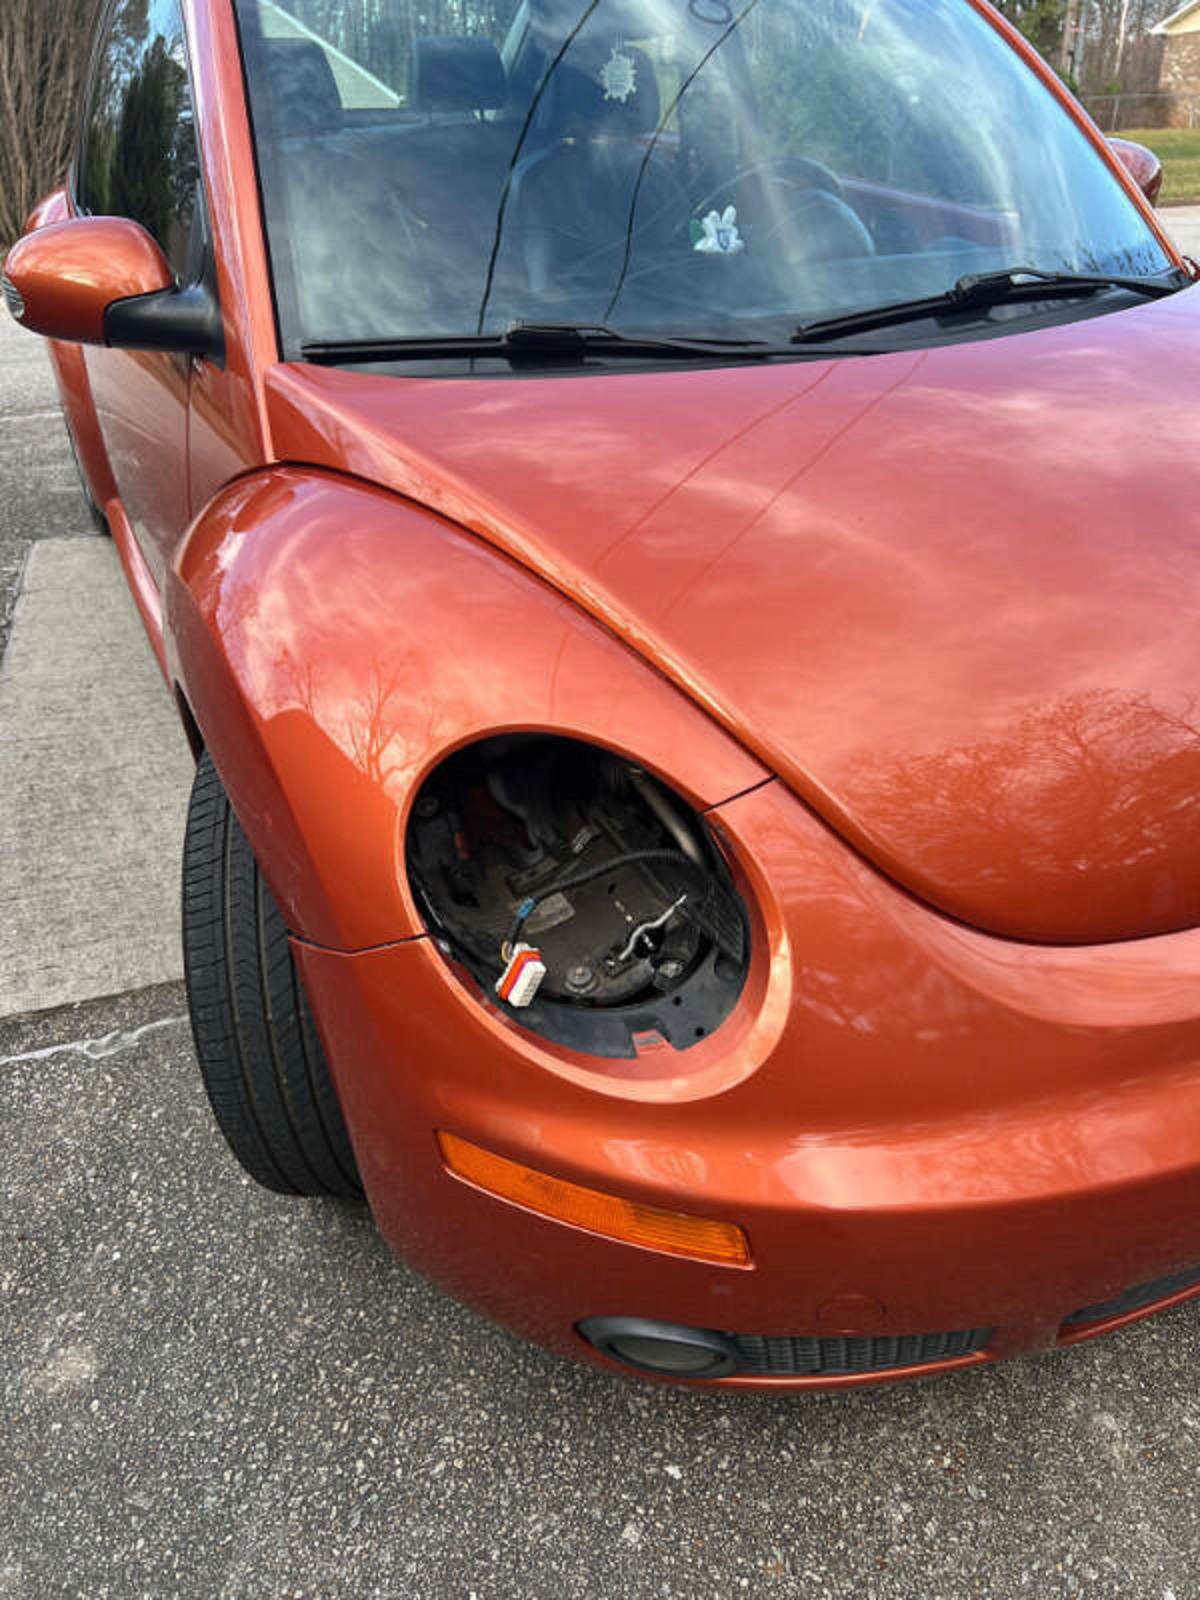 “My whole headlight assembly just straight up disappeared and I have no idea how it could have happened.”